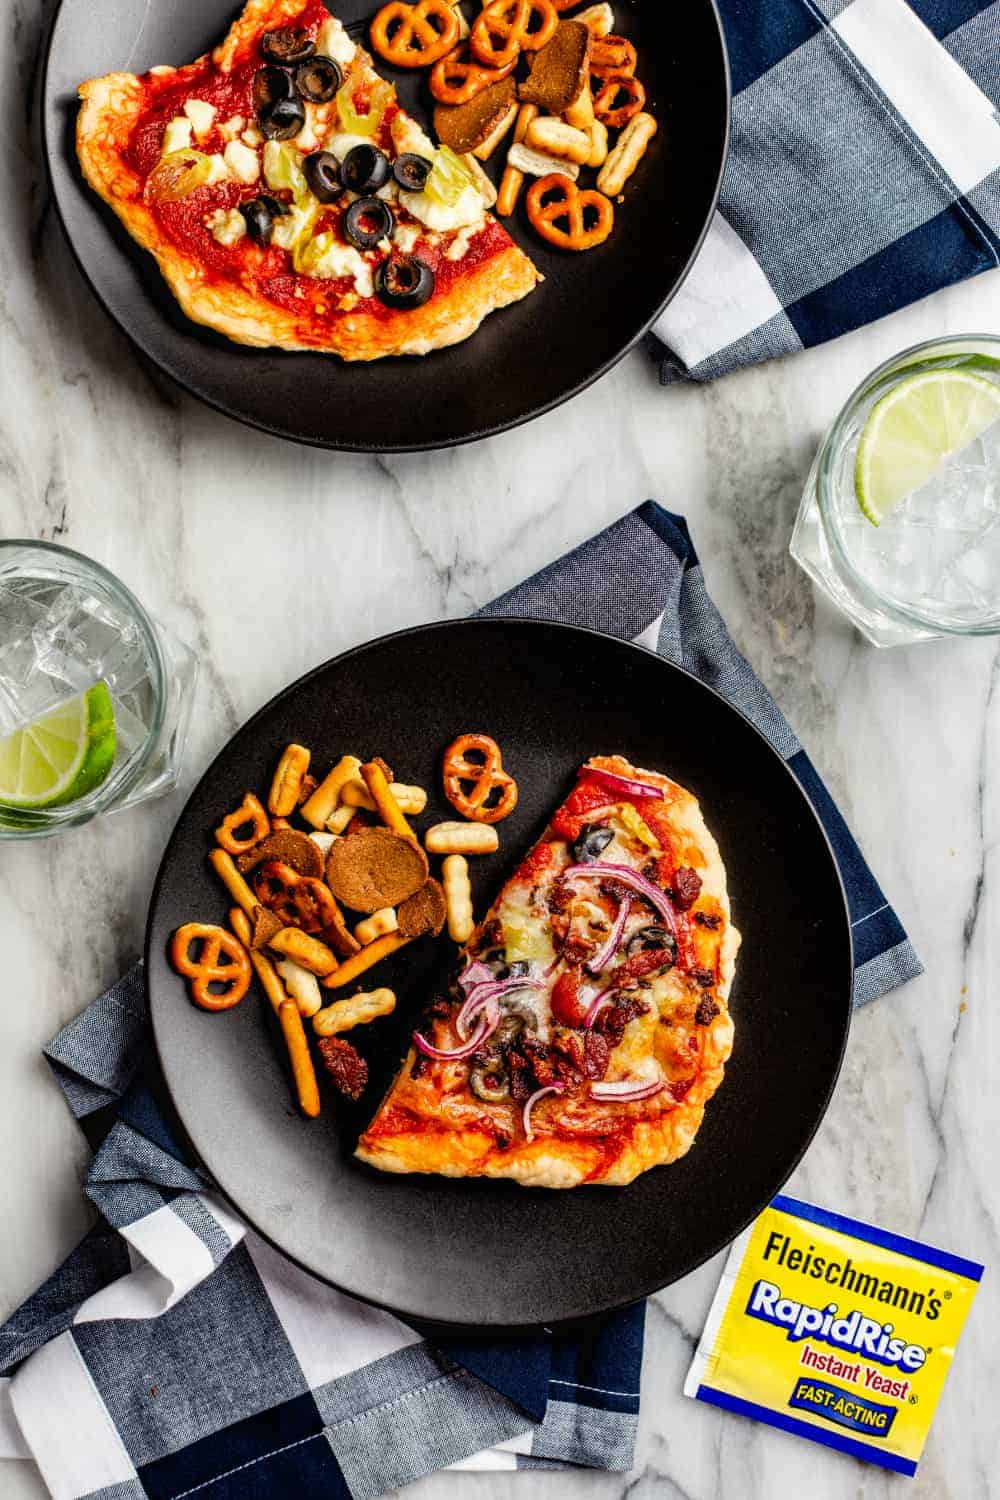 Homemade pizzas made from a DIY pizza bar served on black plates